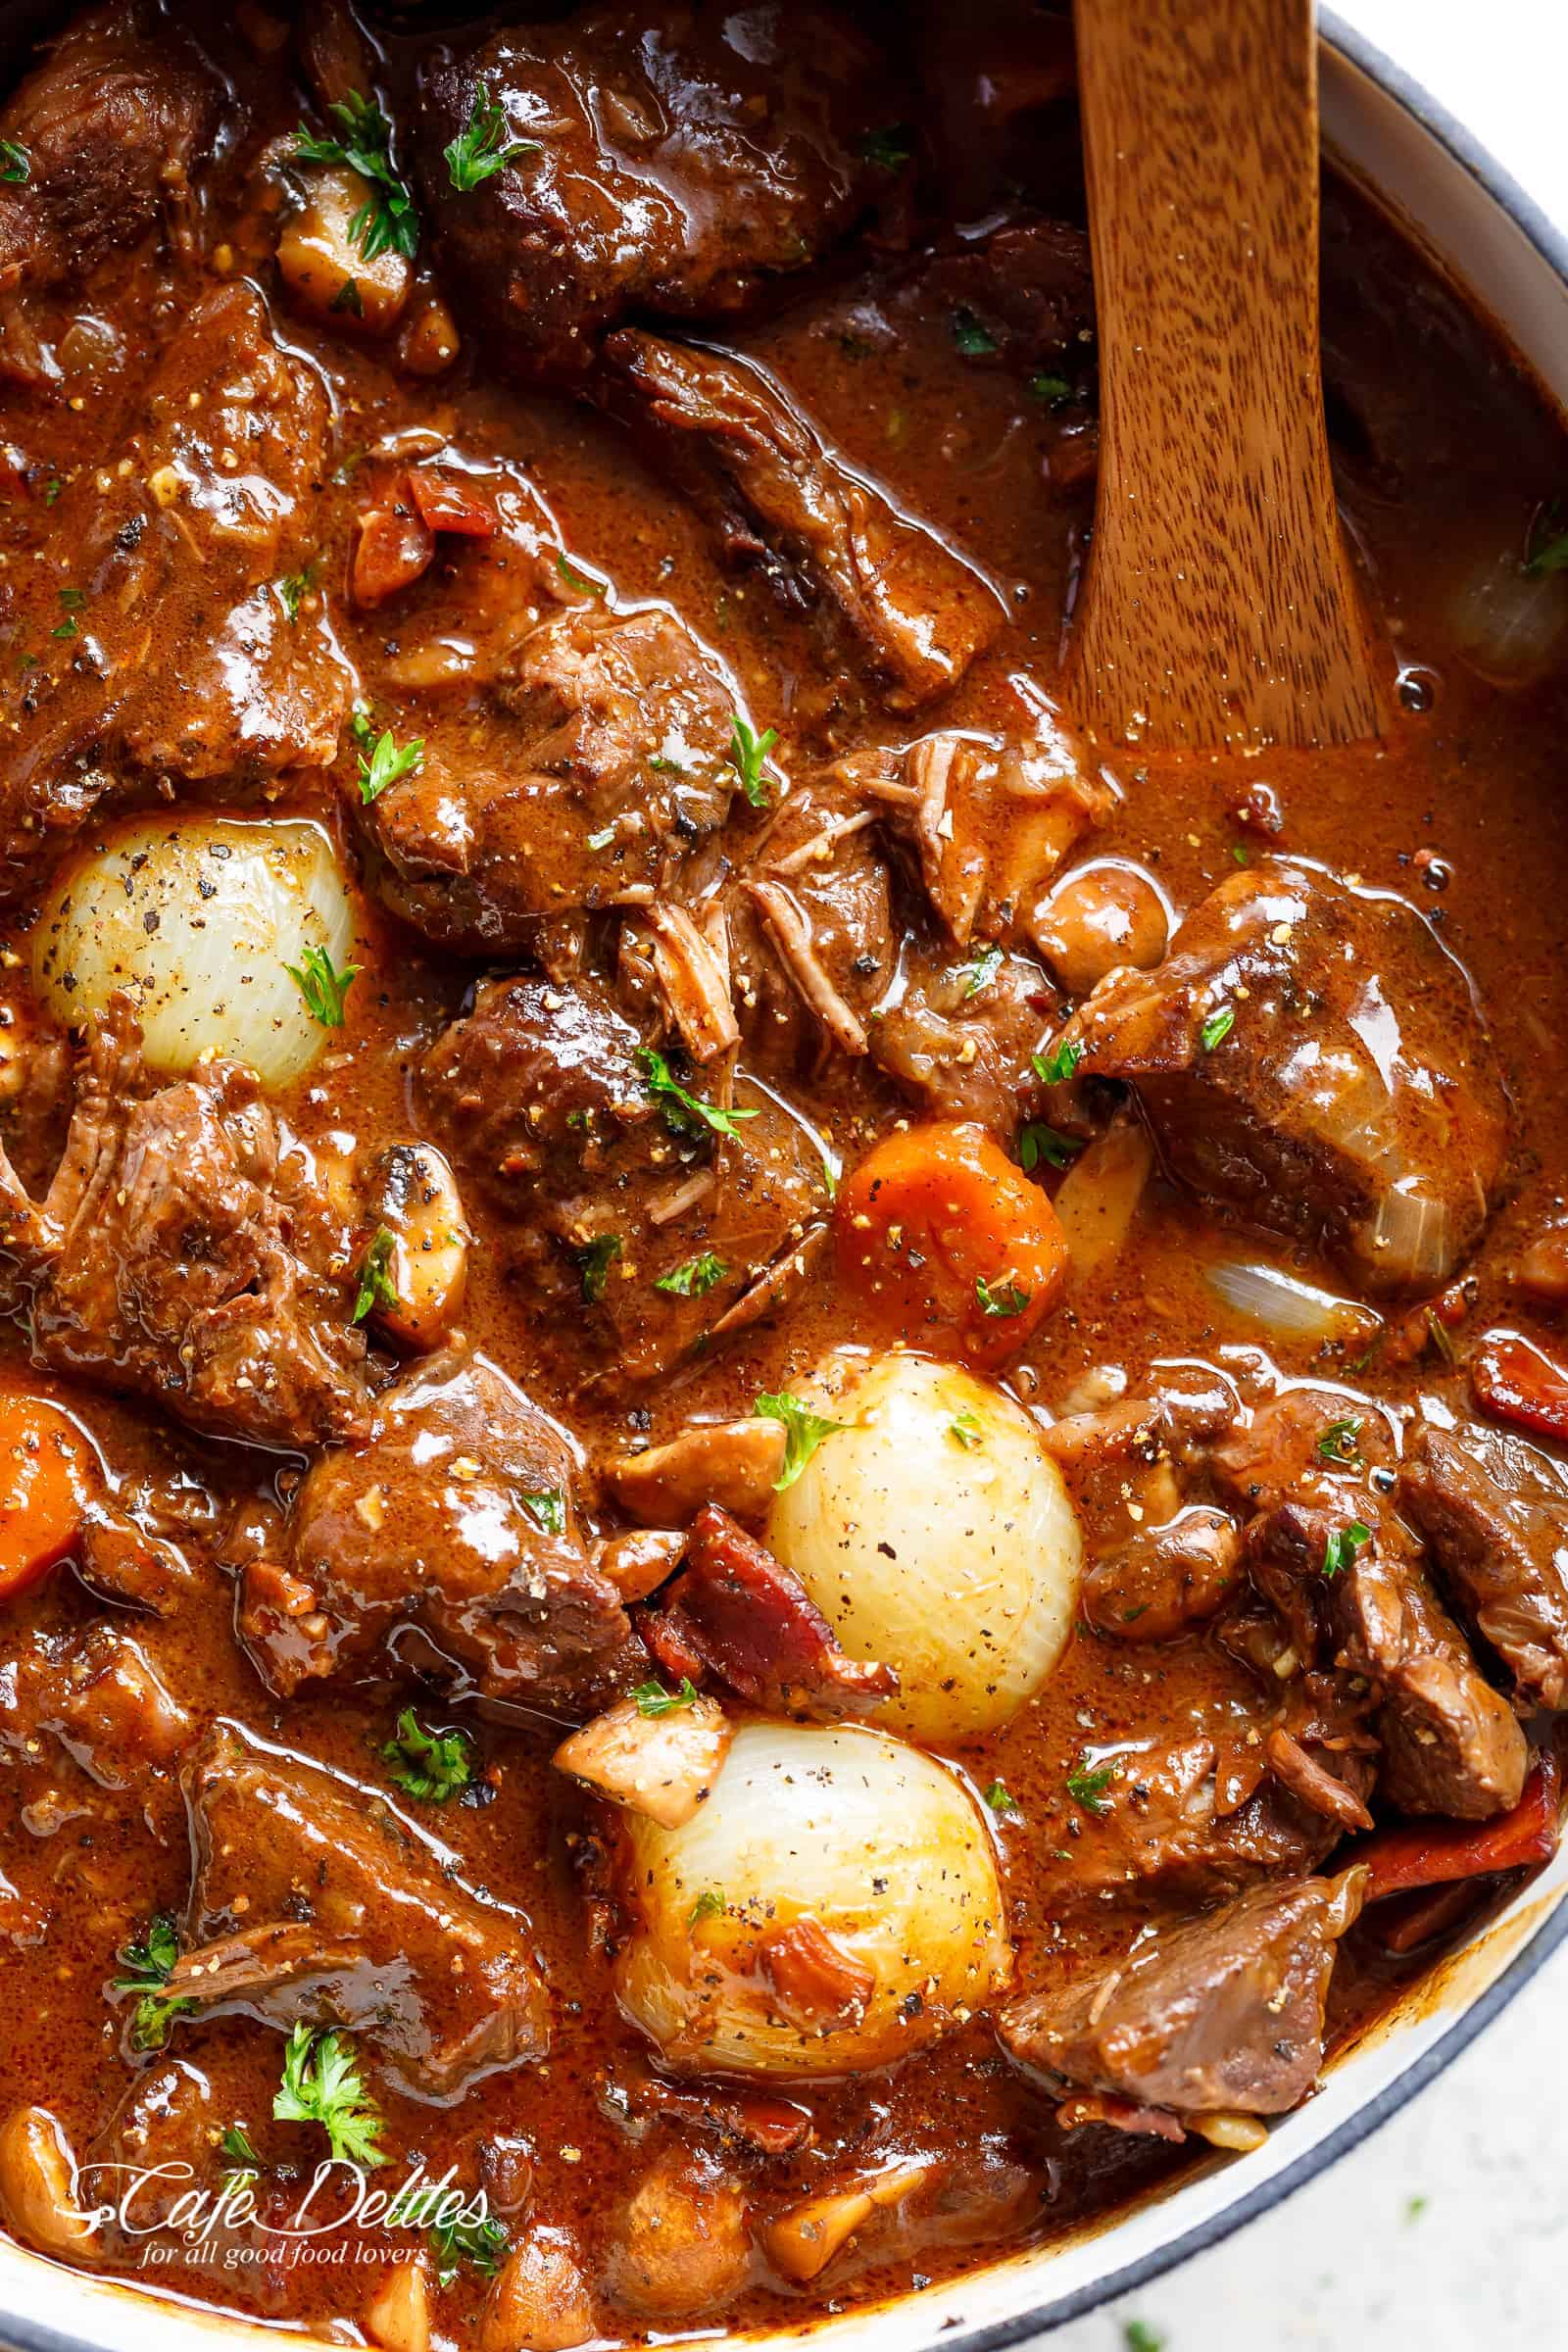 Tender fall apart chunks of beef simmered in a rich red wine gravy makes Julia Child's Beef Bourguignon an incredible family dinner. Slow Cooker, Instant Pot/Pressure Cooker, Stove Top and the traditional Oven method included! Easy to make, every step is worth it | cafedelites.com